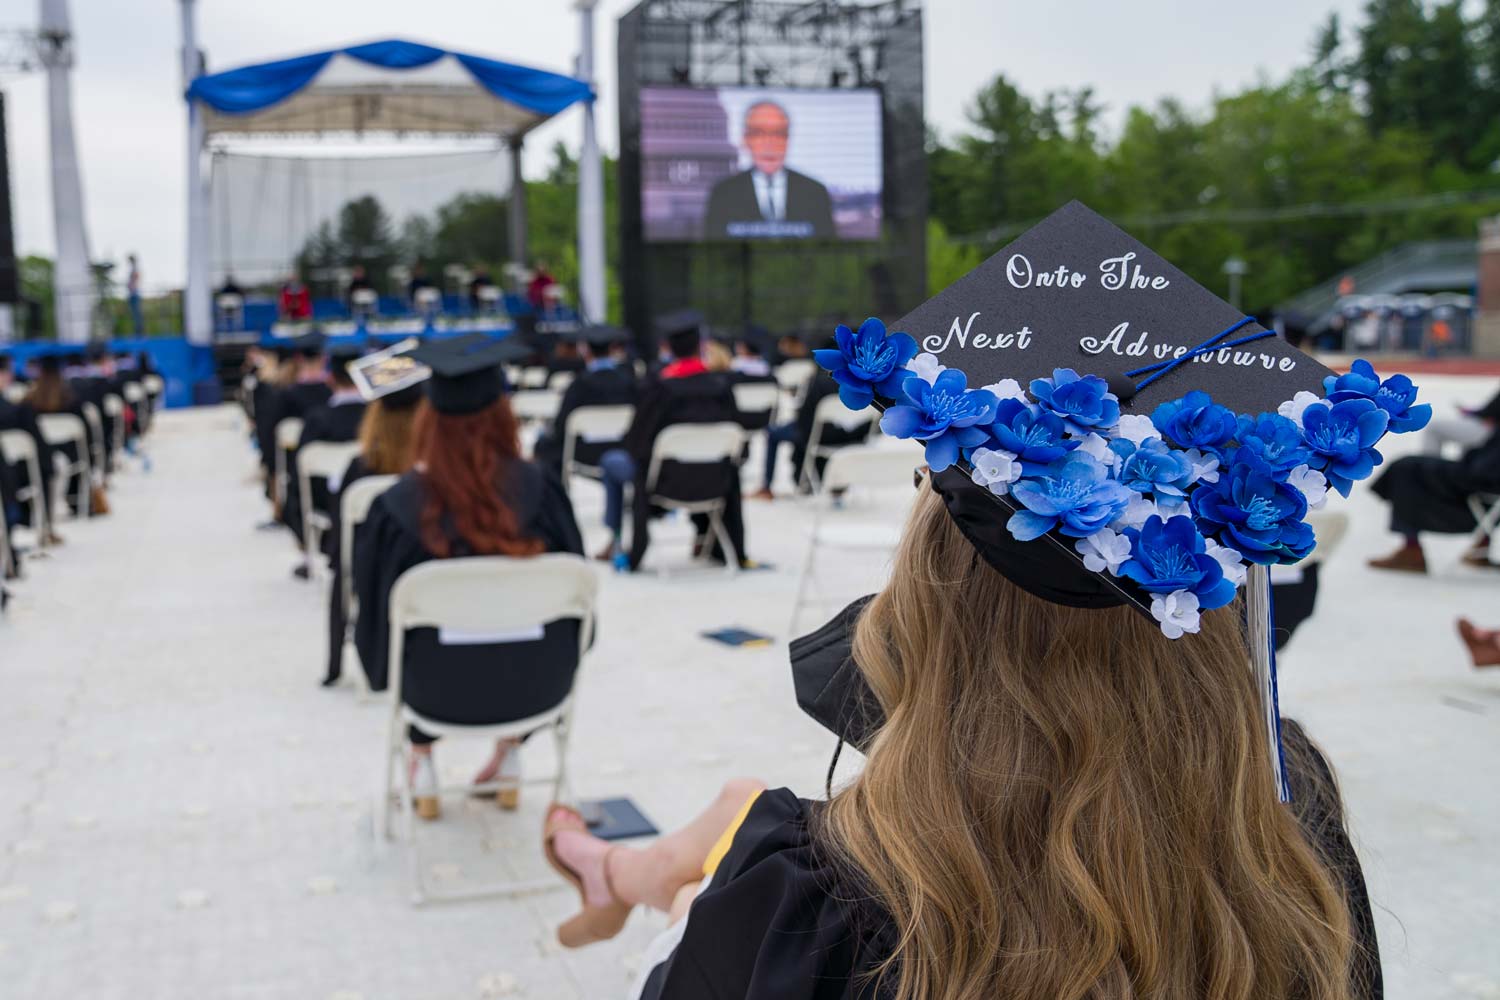 Student watching the ceremony and wearing a graduation cap that reads "onto the next adventure" in curly cursive lettering with blue and white flowers collaged at the bottom